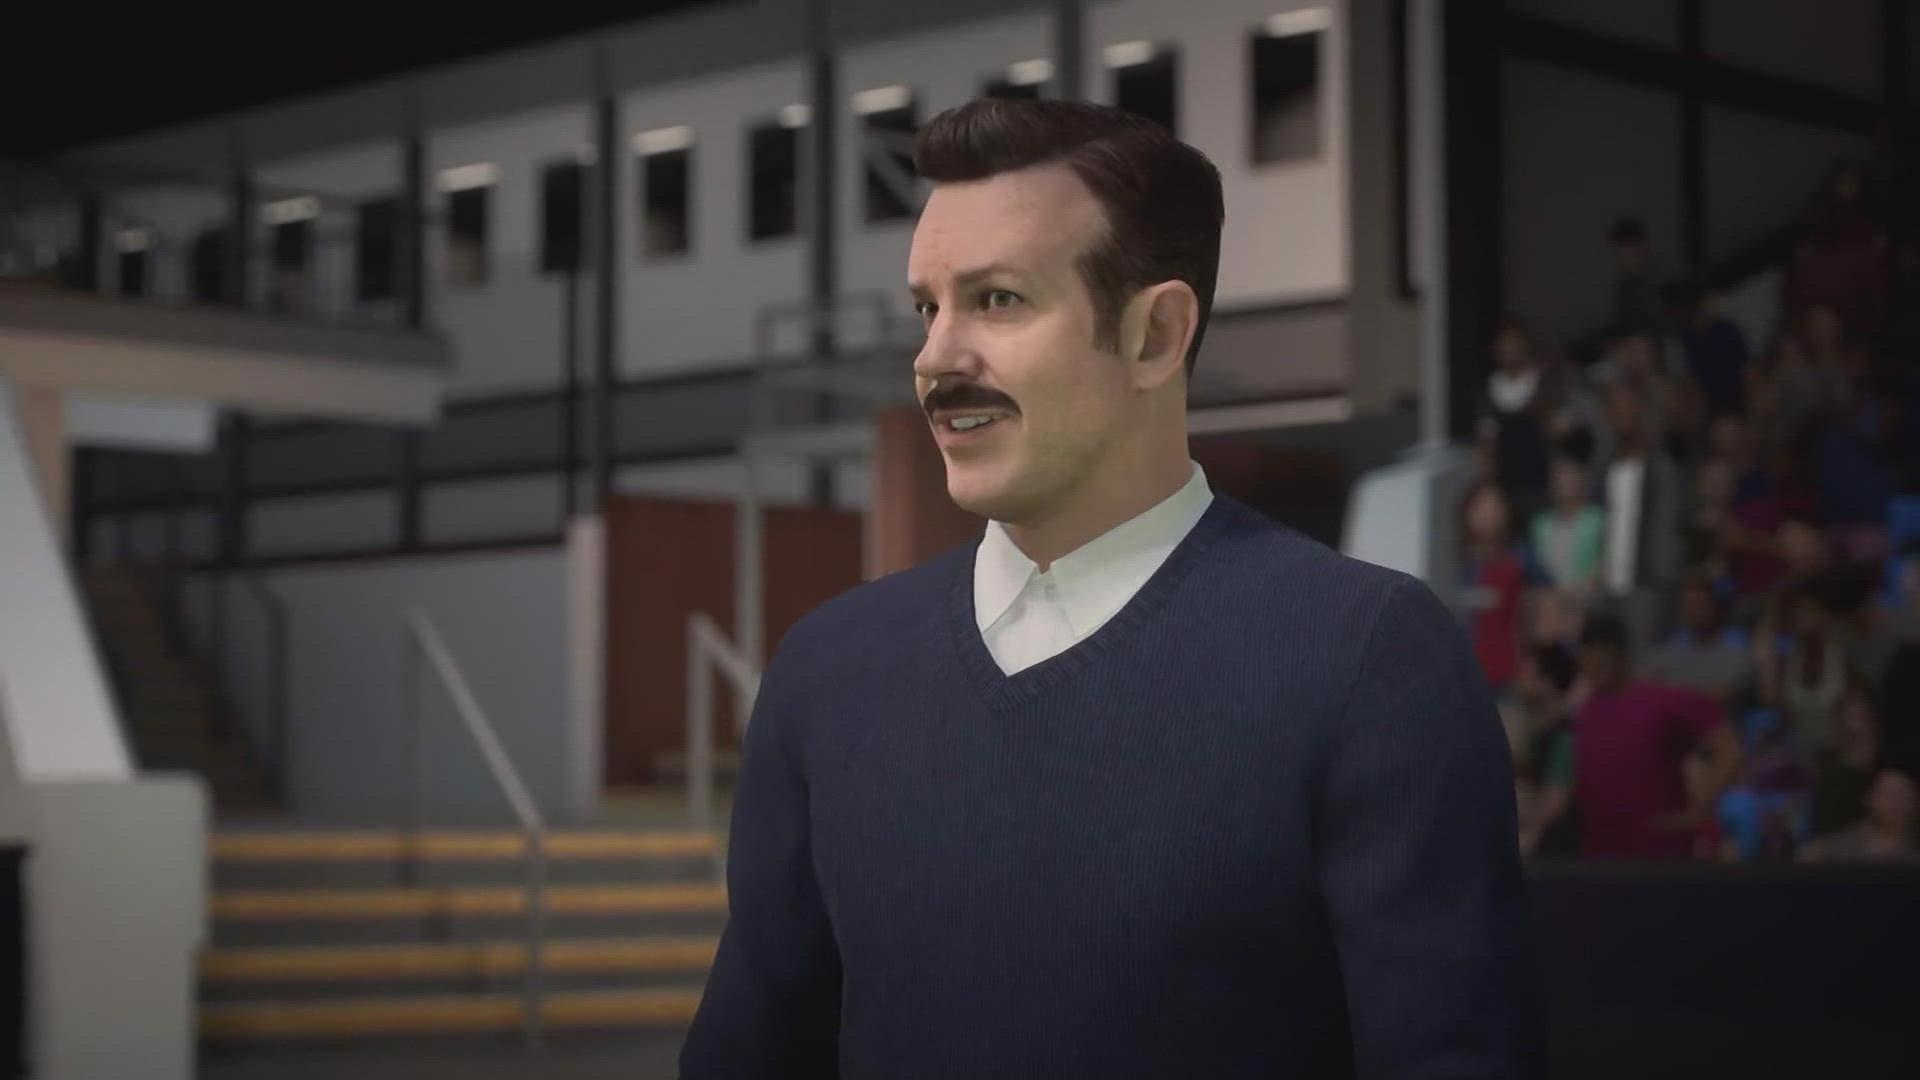 The mustached soccer coach for AFC Richmond will be making his debut in the upcoming FIFA video game.